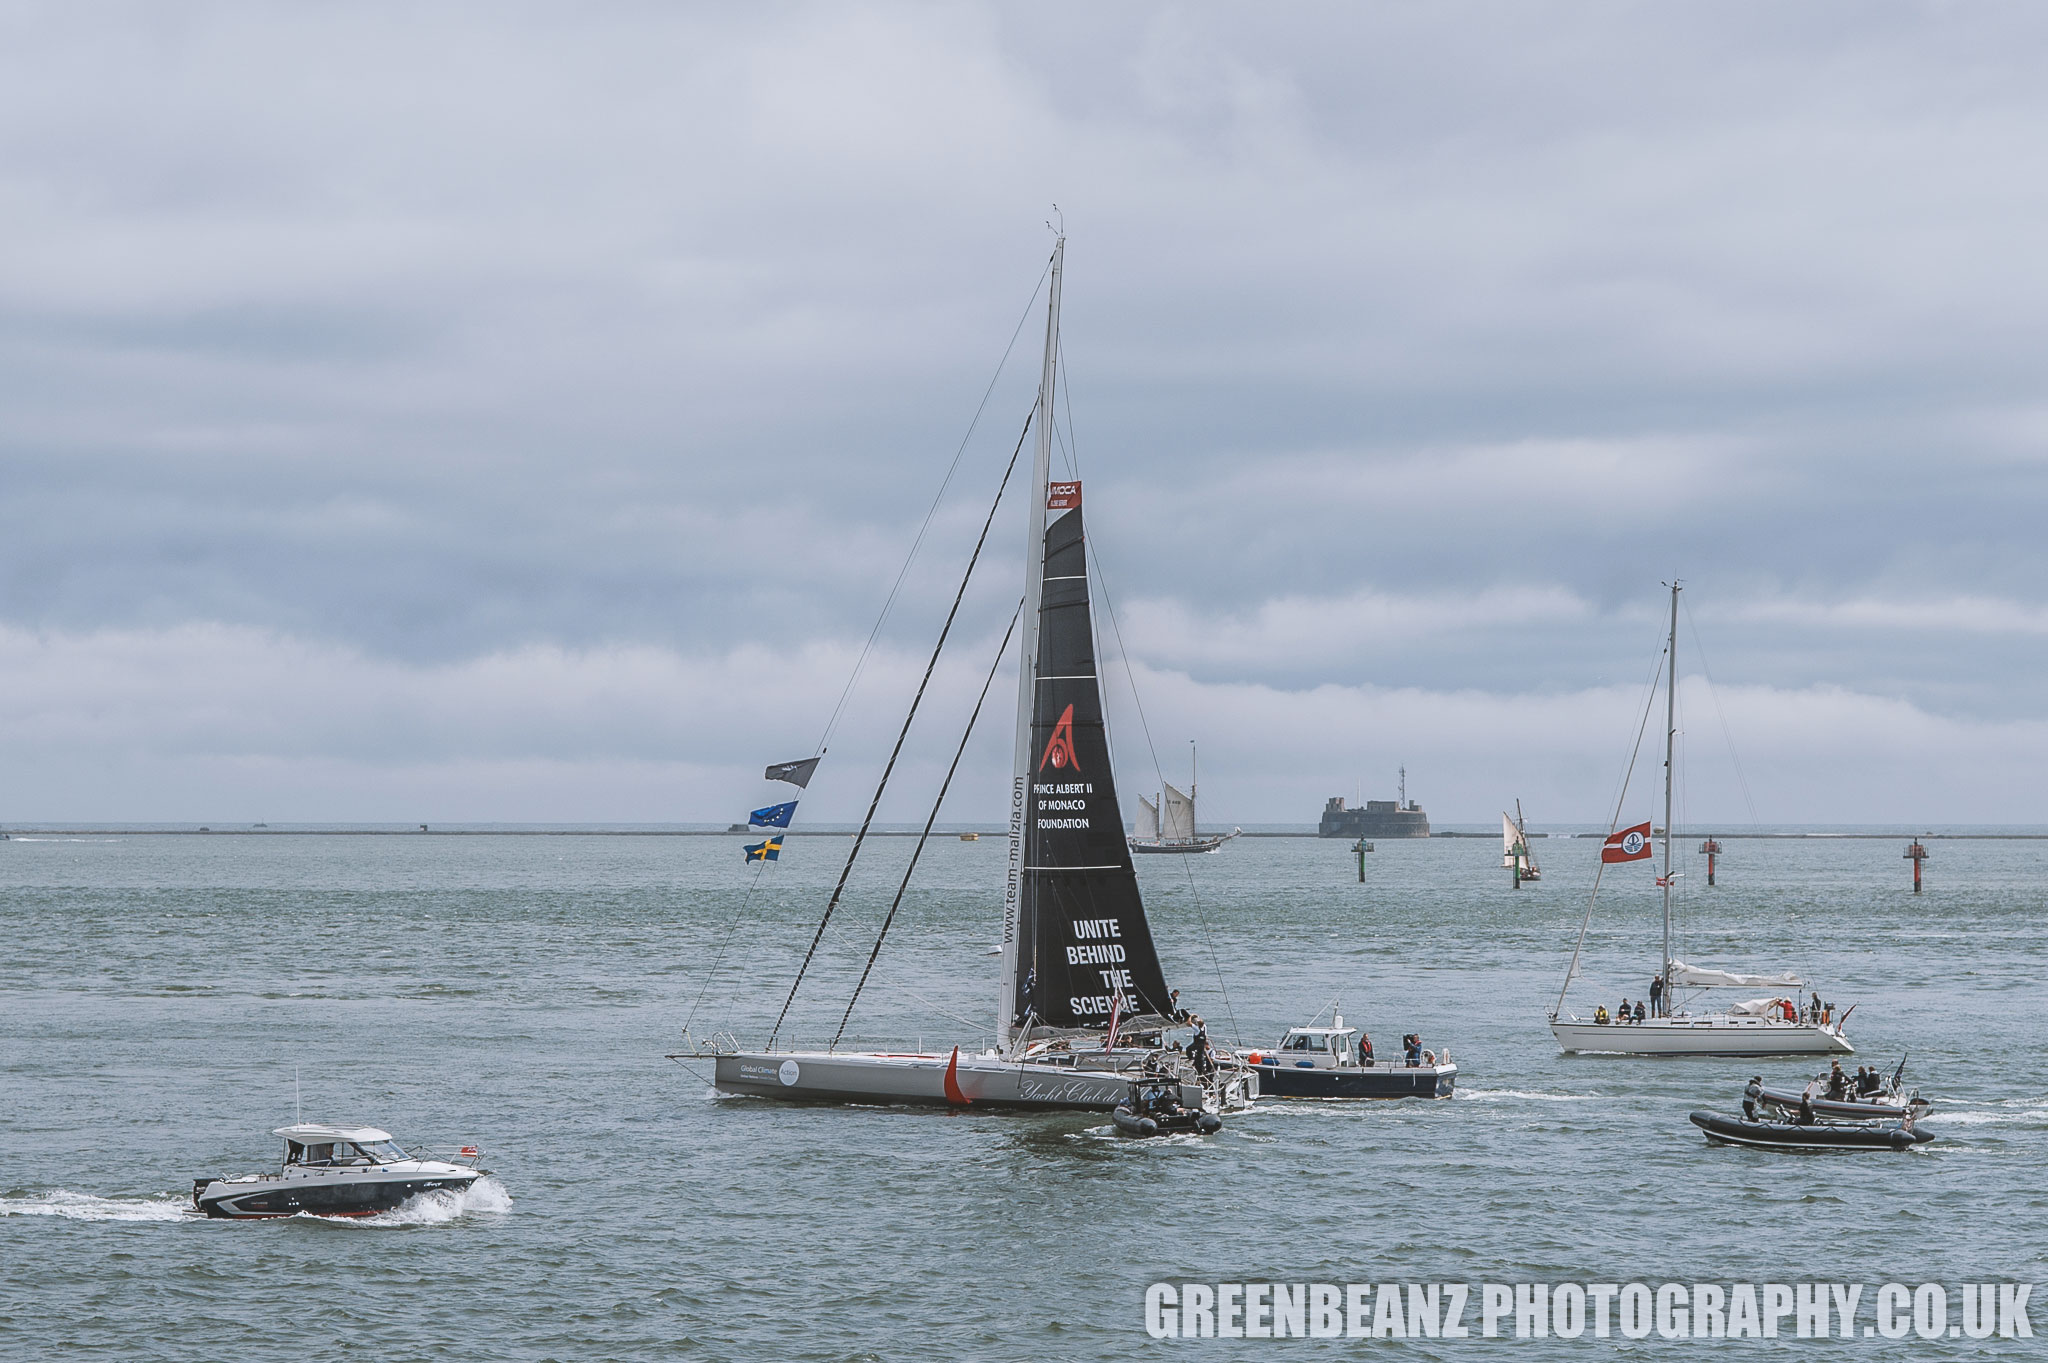 Malizia leaves Plymouth for the UN Climate Change Summitt 14/08/2019